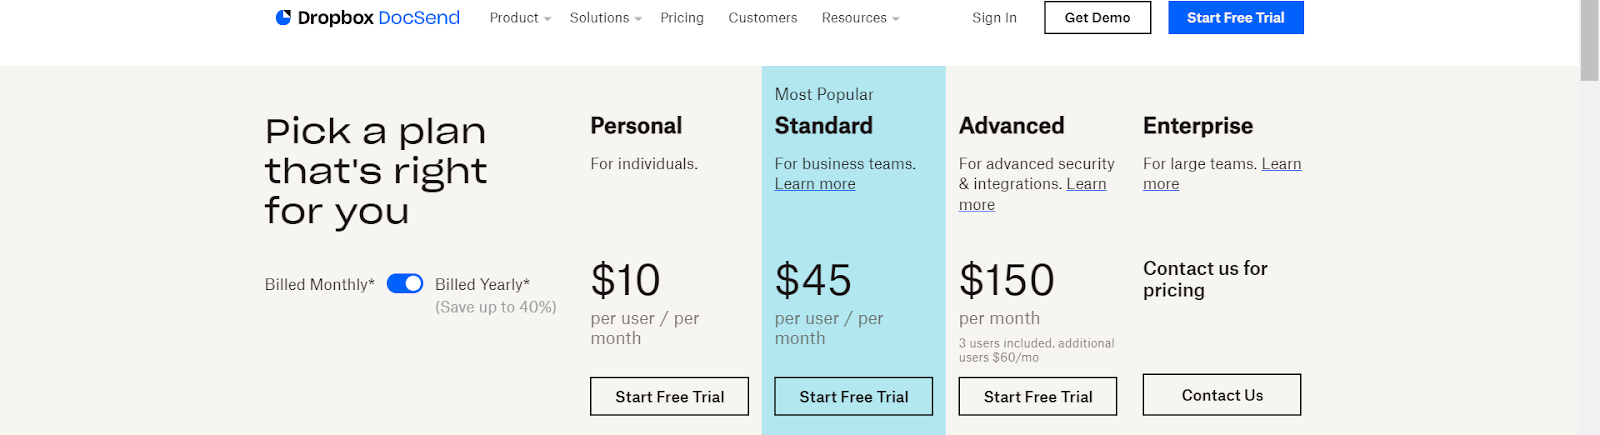 DocSend Pricing